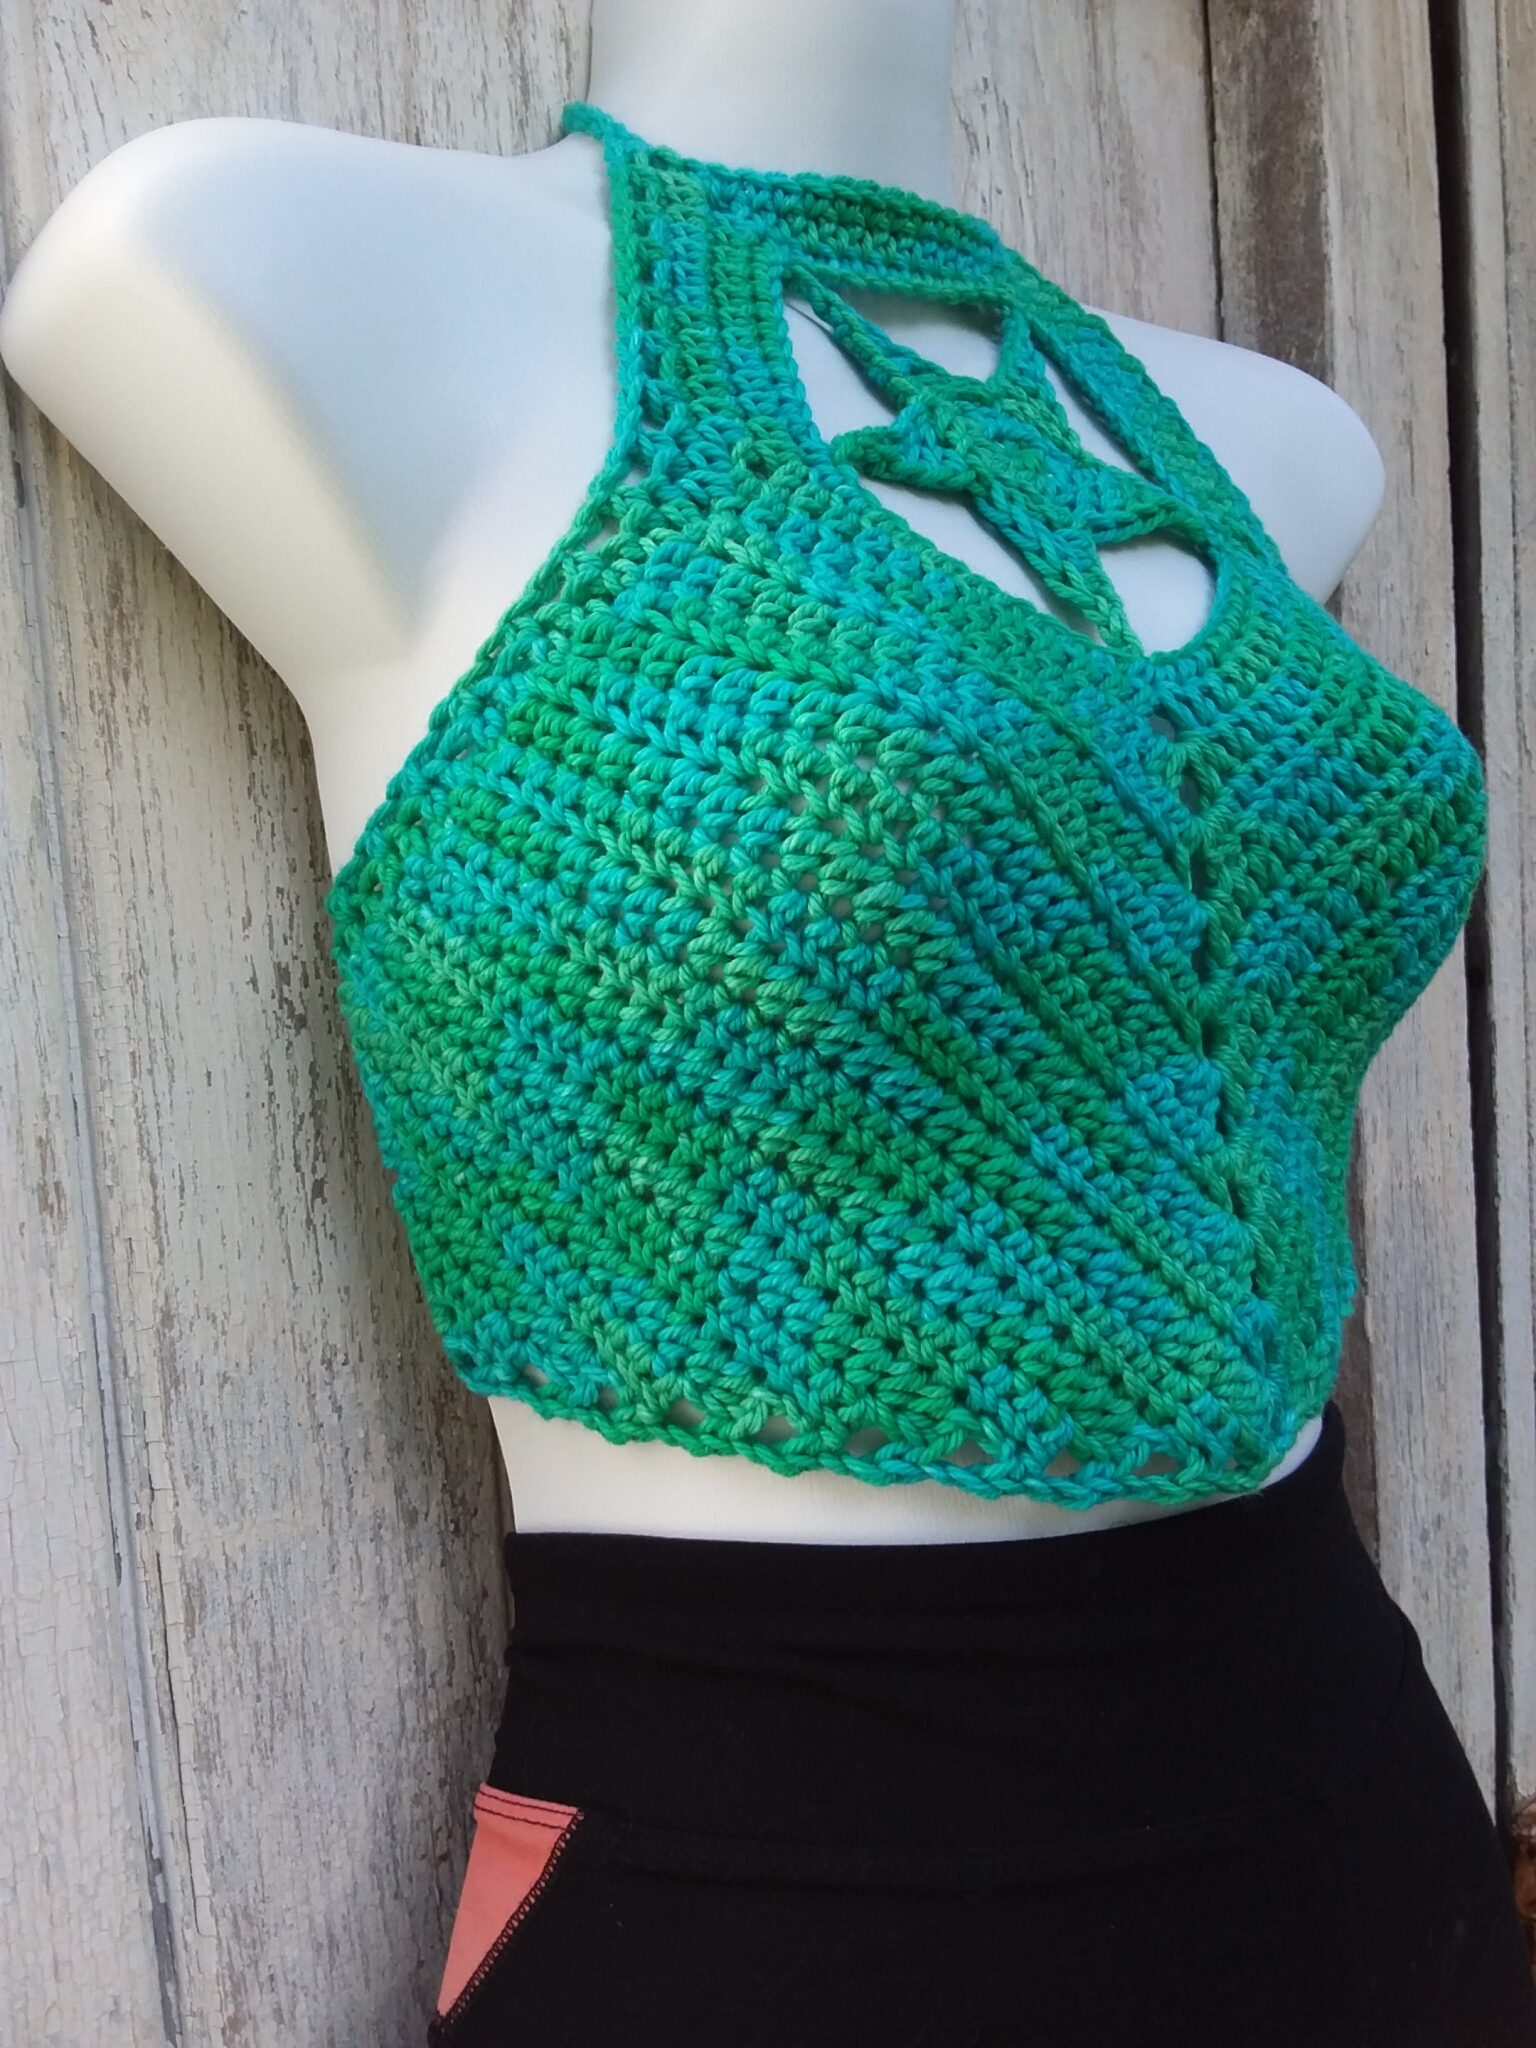 Star Crochet Crop Top Halter, Hand Dyed Organic Cotton, Cup Size